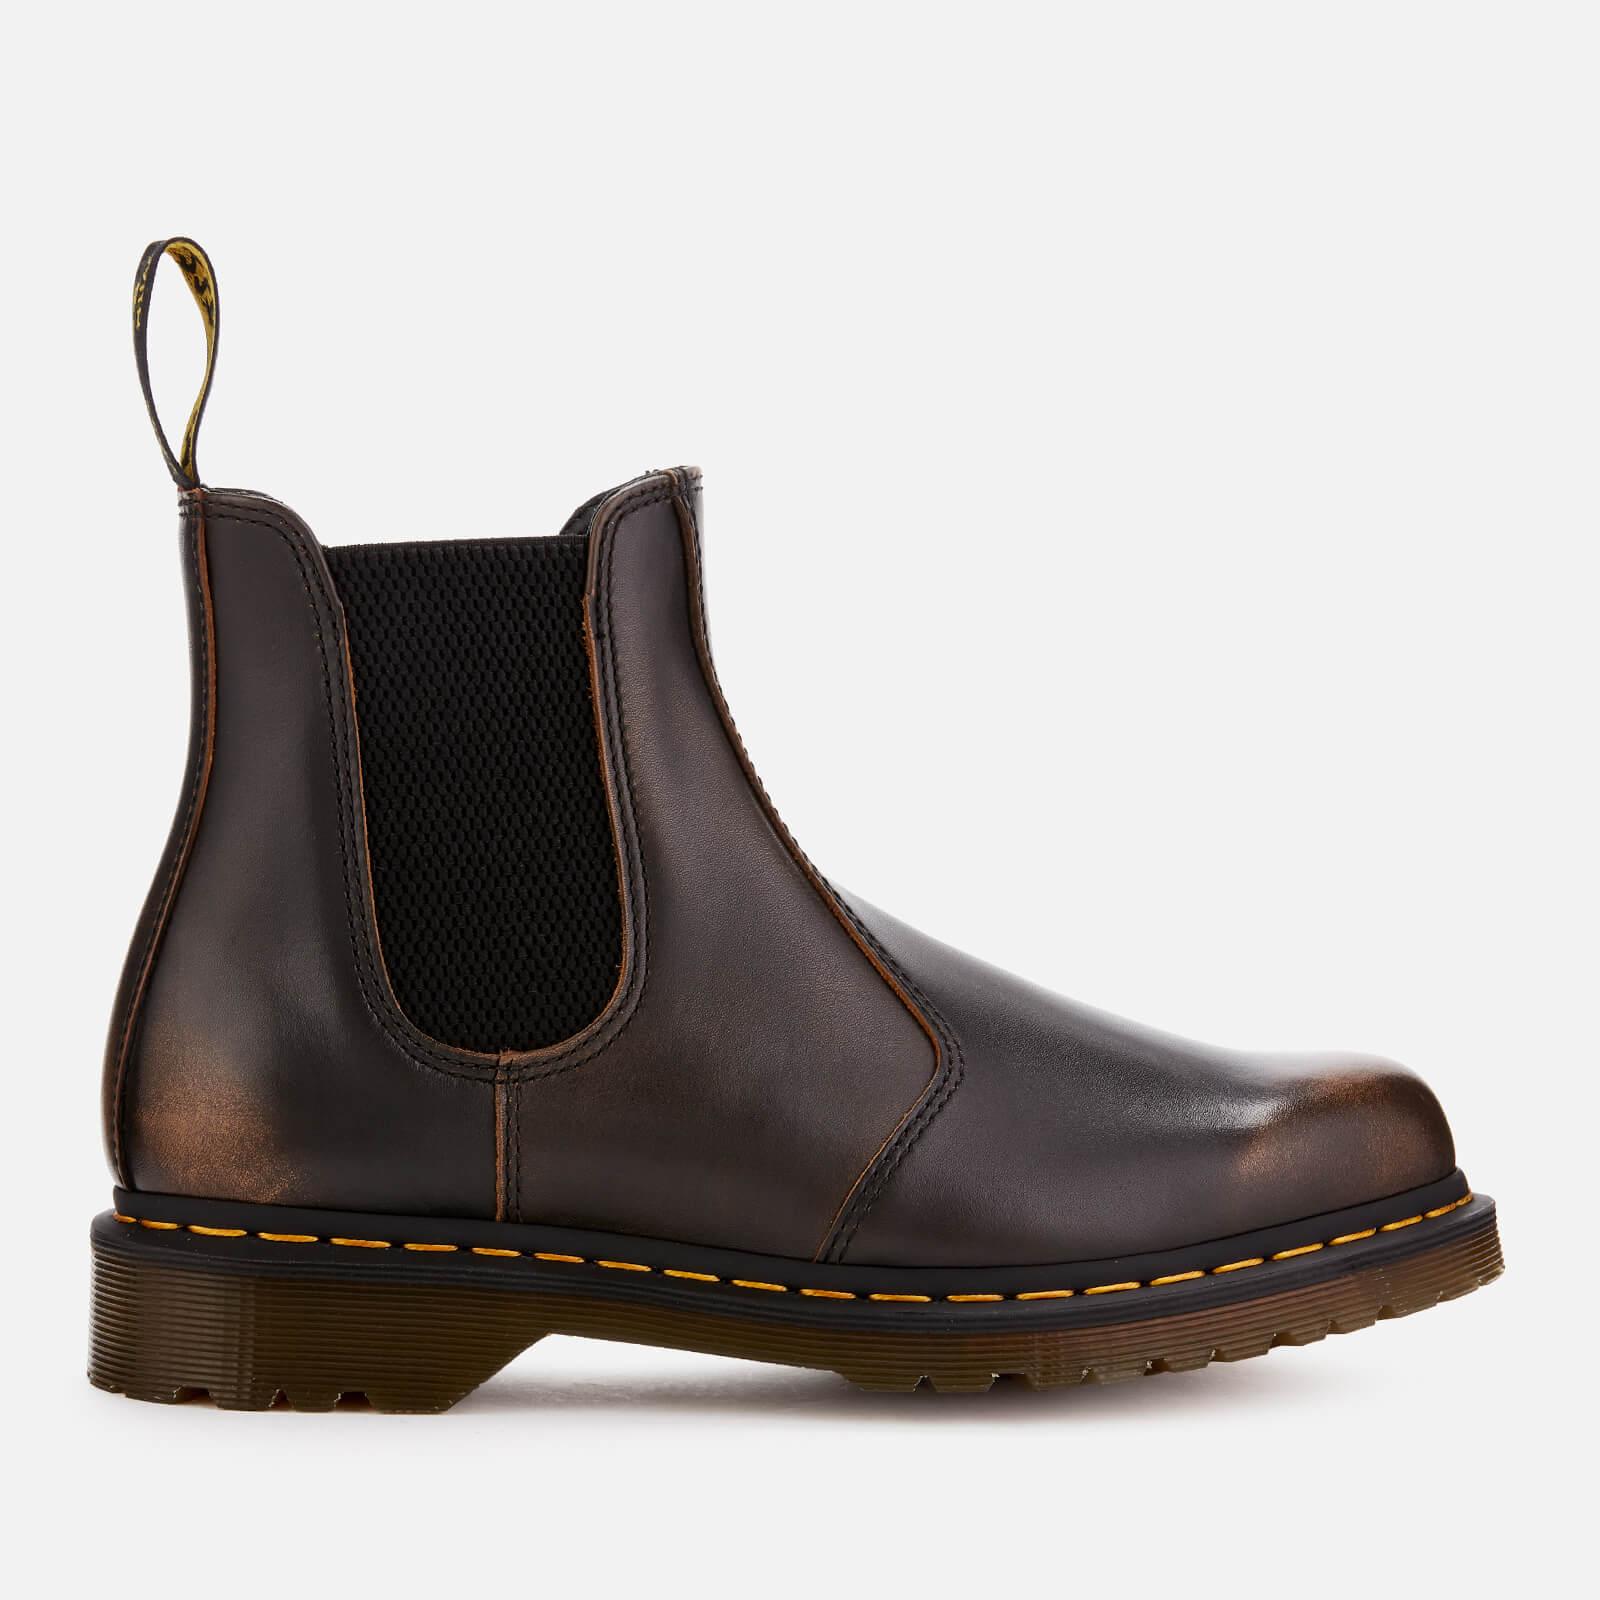 Lyst - Dr. Martens 2976 Vintage Leather Chelsea Boots in Brown for Men